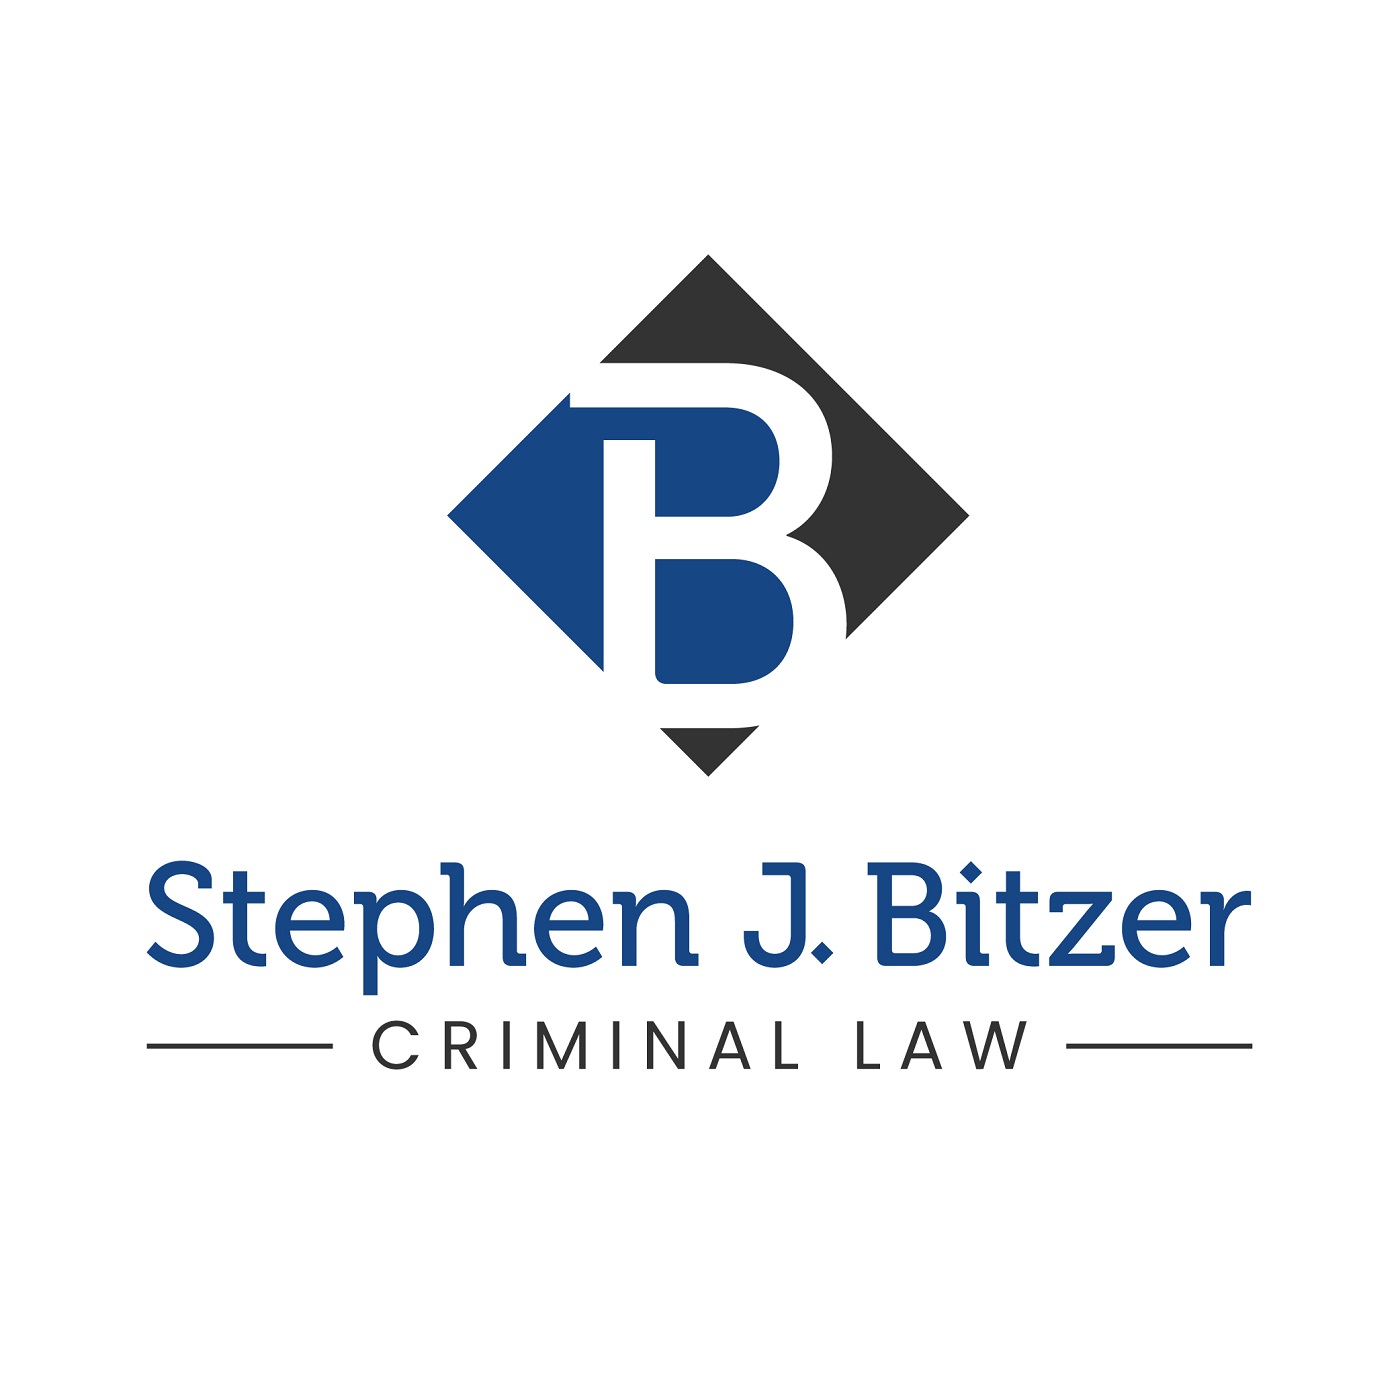 Get Effective Criminal Defense For Violent Crimes From This Calgary Law Firm